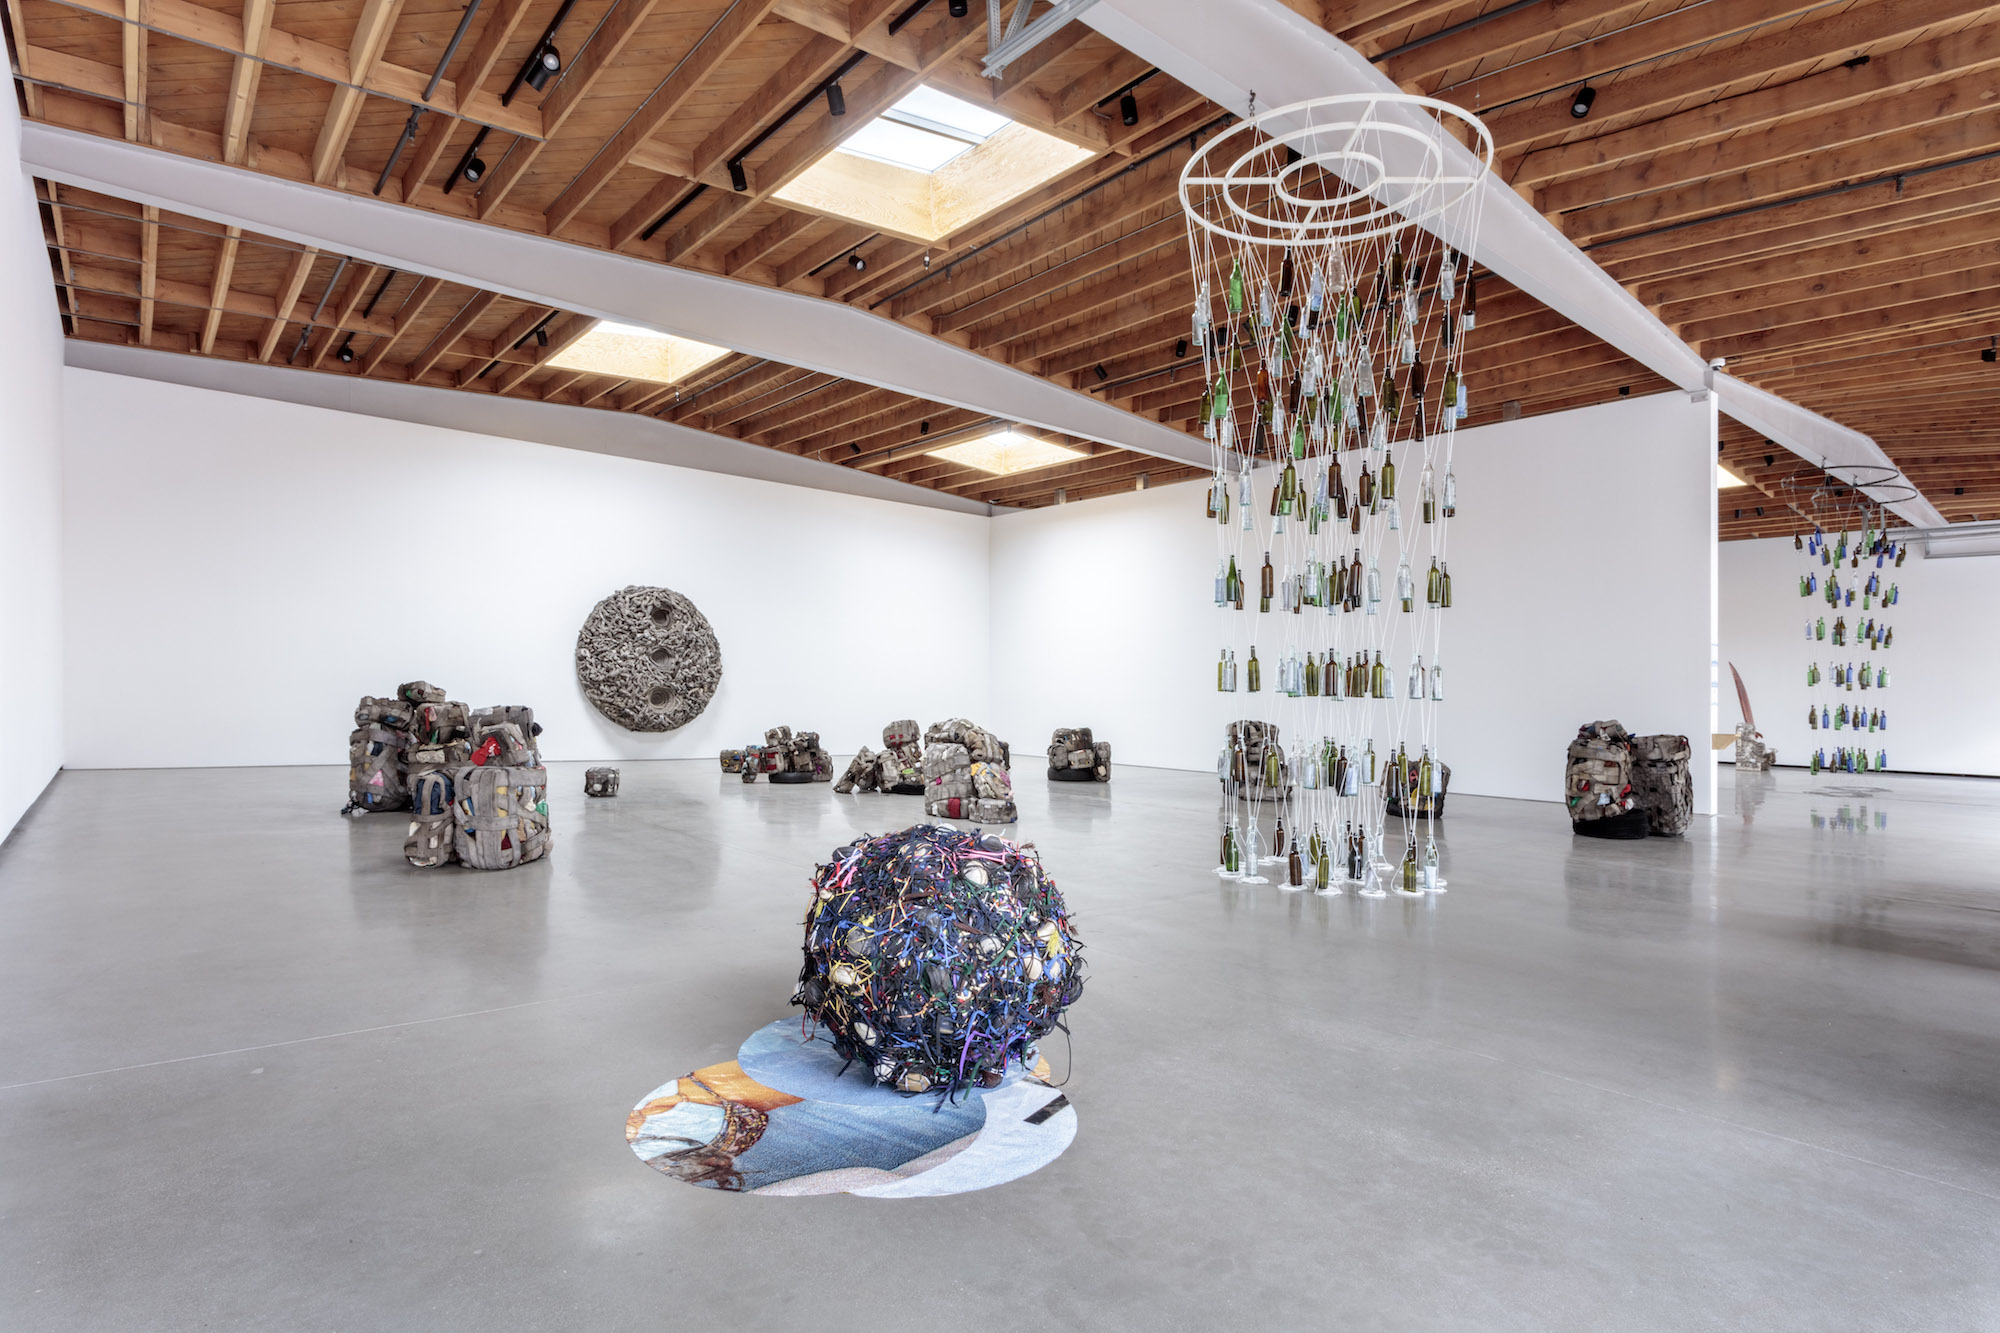 installation view of nari ward pieces made out of recycled materials